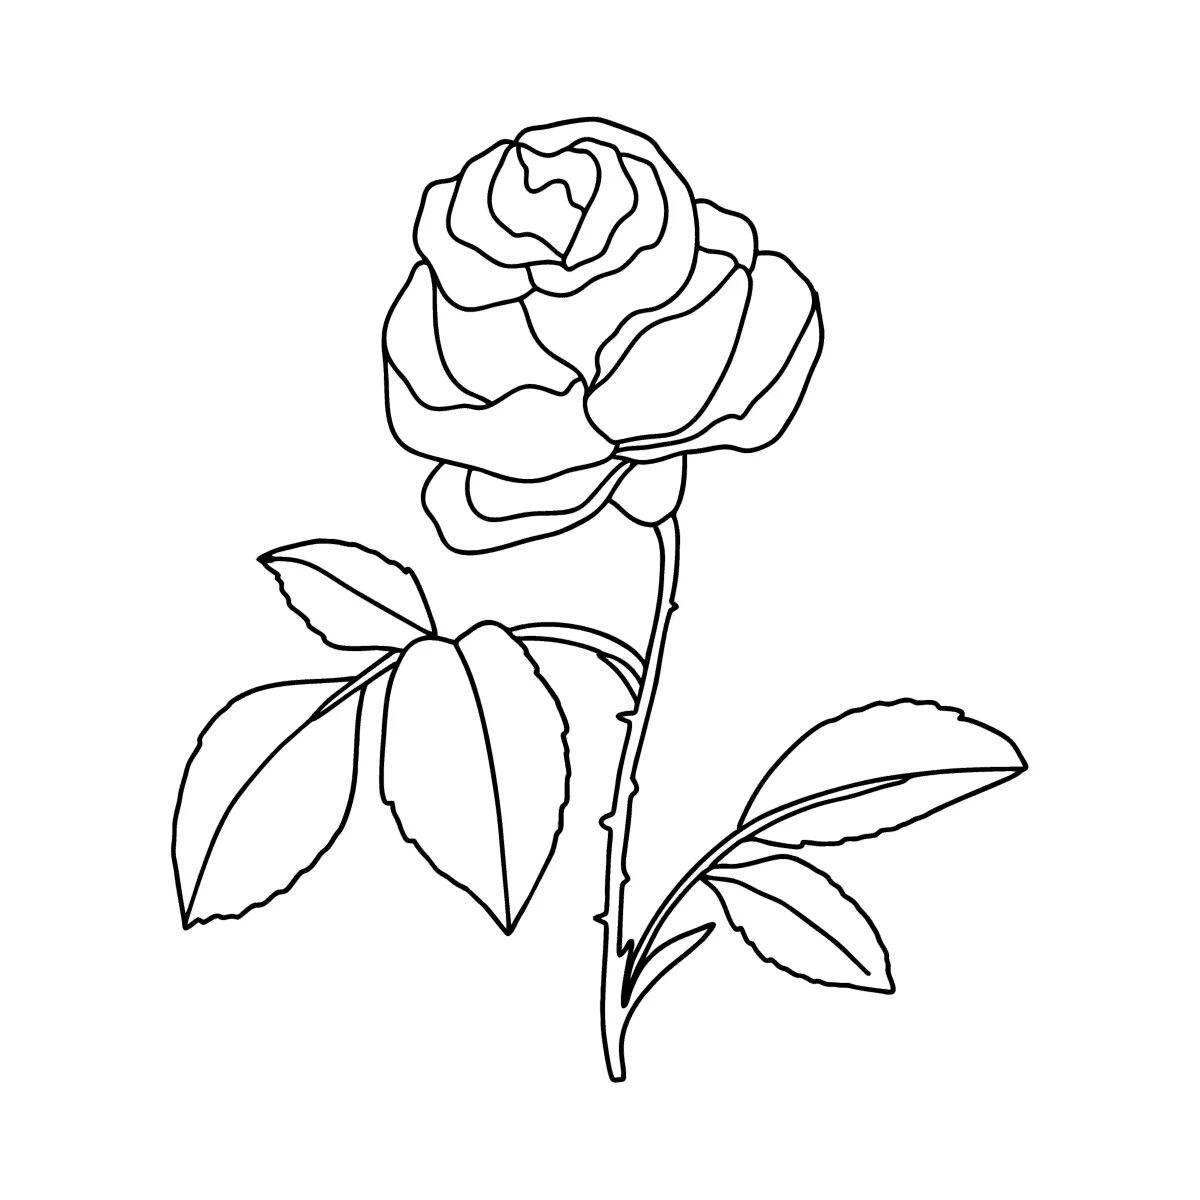 Fancy rose coloring book for 5-6 year olds